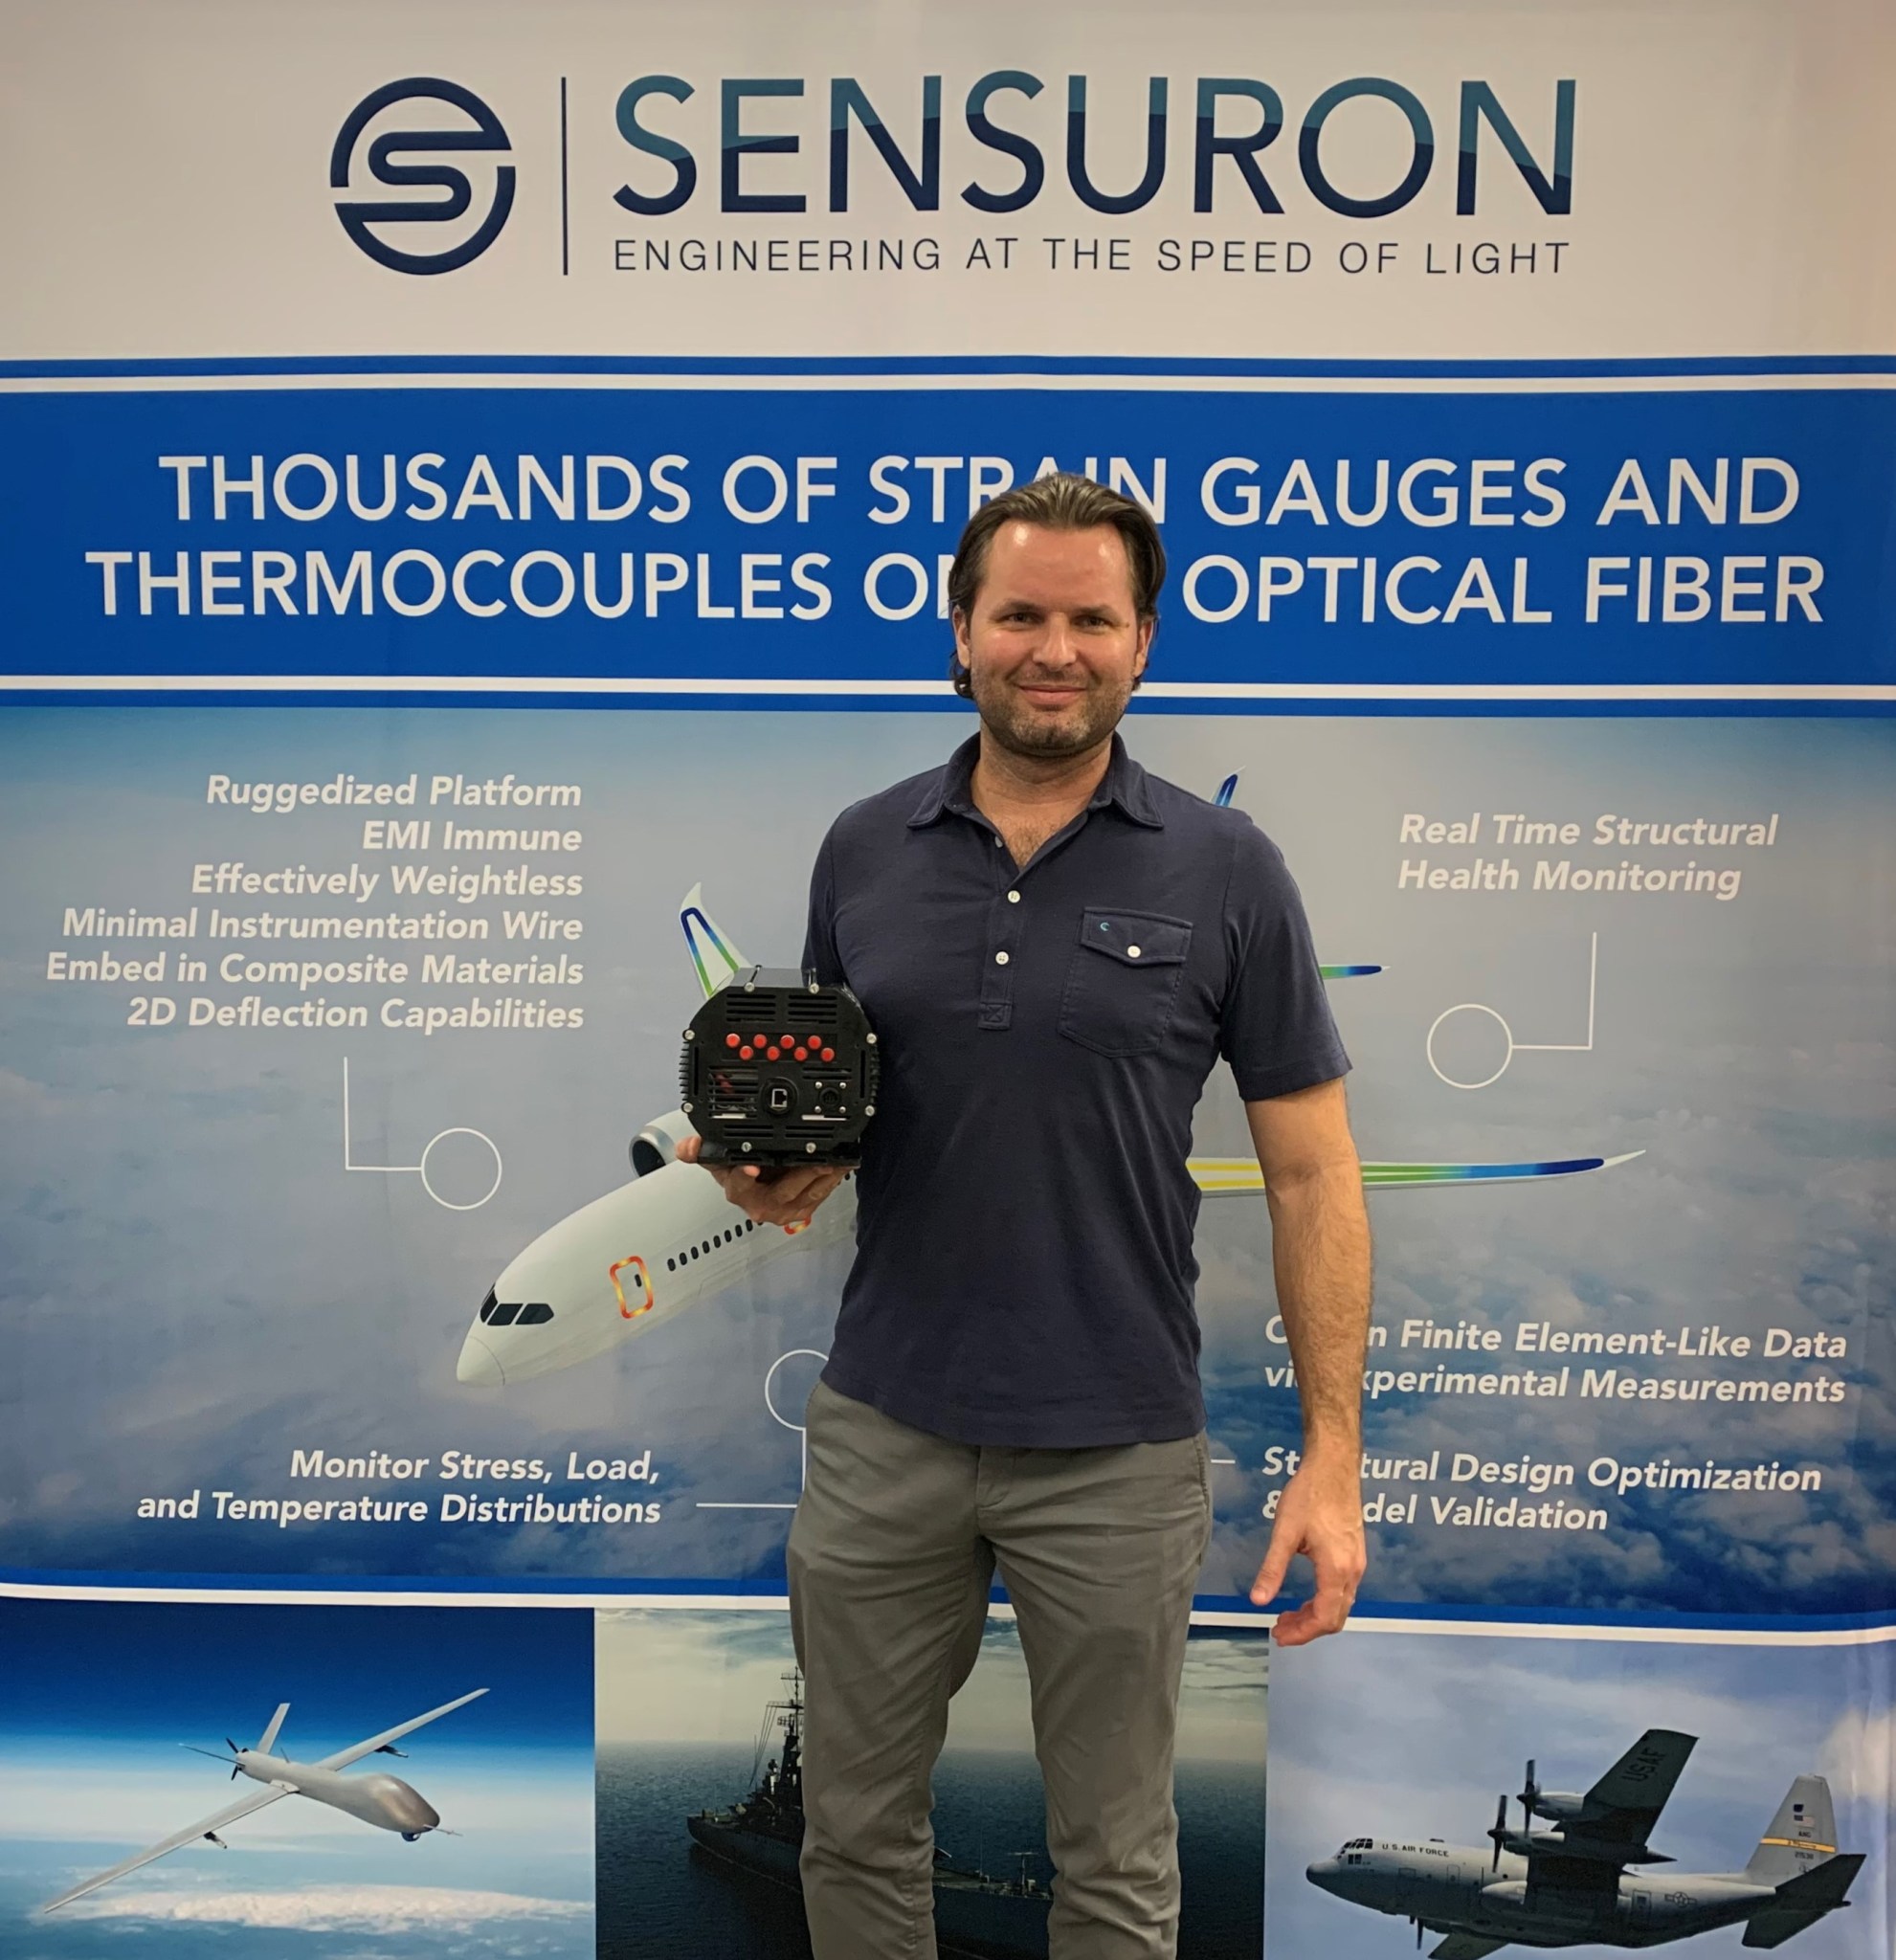 Justin Braun, chief executive officer of Sensuron, shows off one of company’s products based on FOSS technology. Sensuron was created as a result of the development work on FOSS and now sells its products worldwide. 